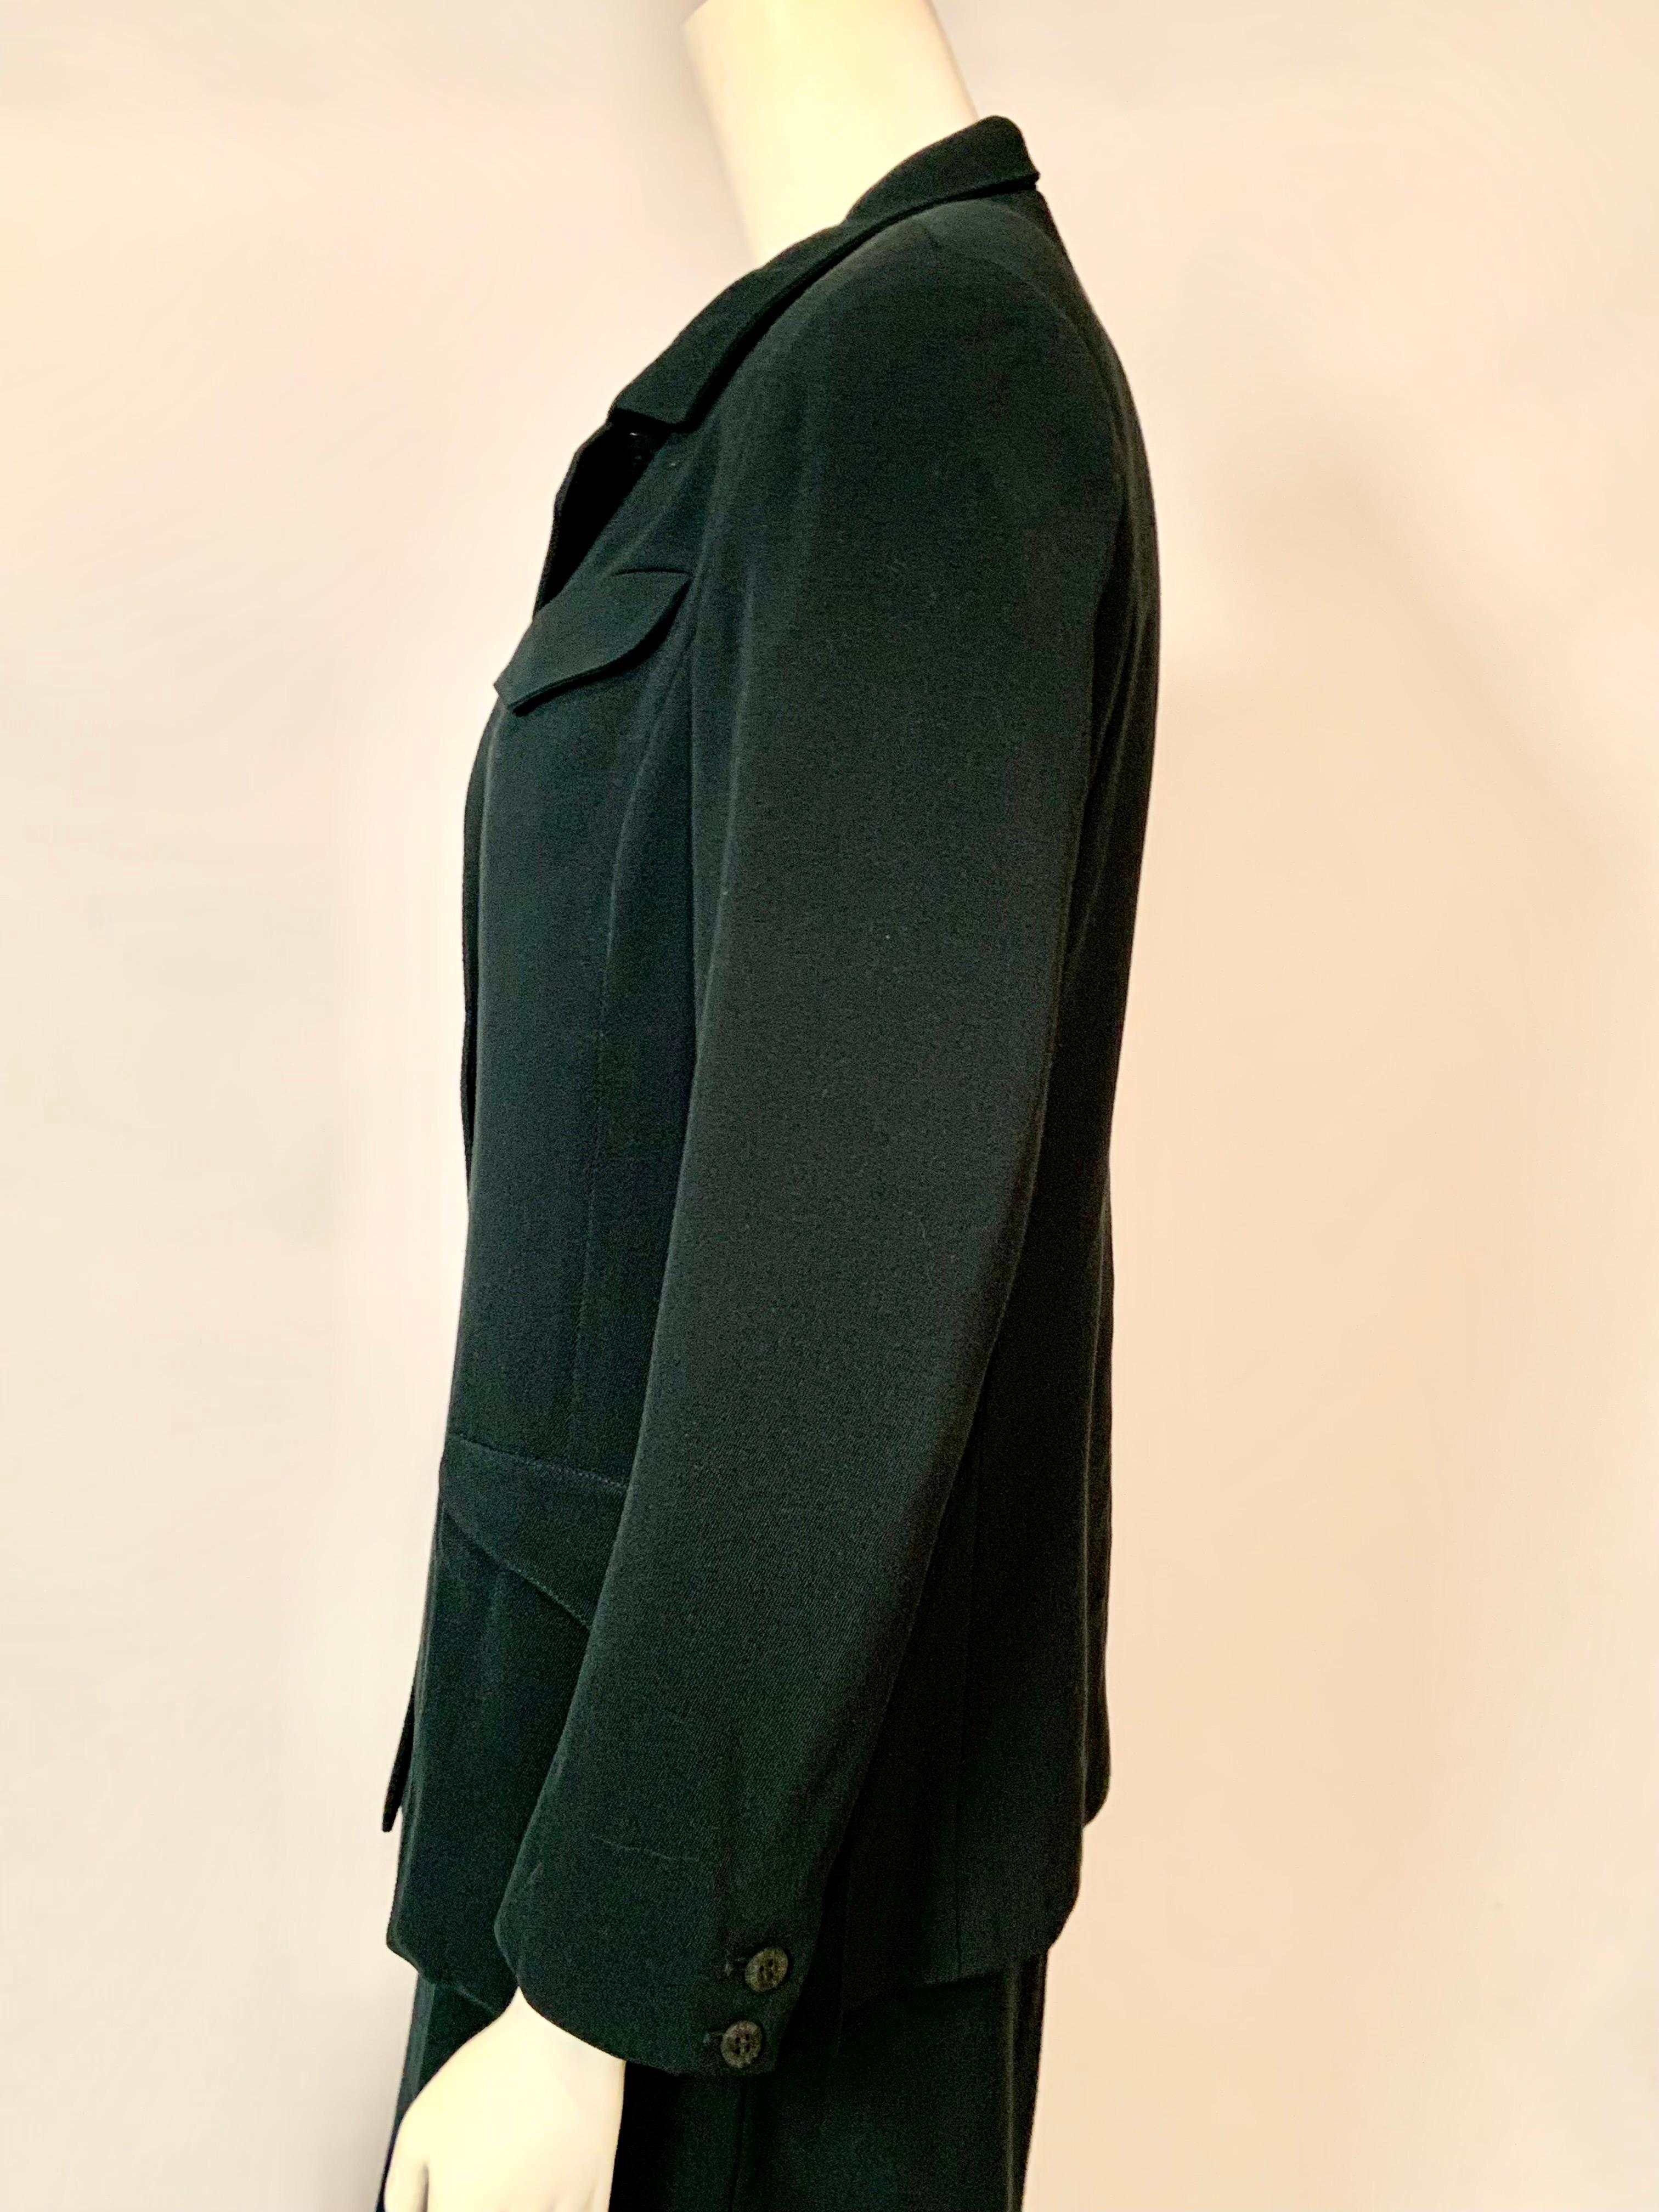 Hermes, Paris Vintage Bottle Green Wool Midi Skirt Suit In Good Condition For Sale In New Hope, PA